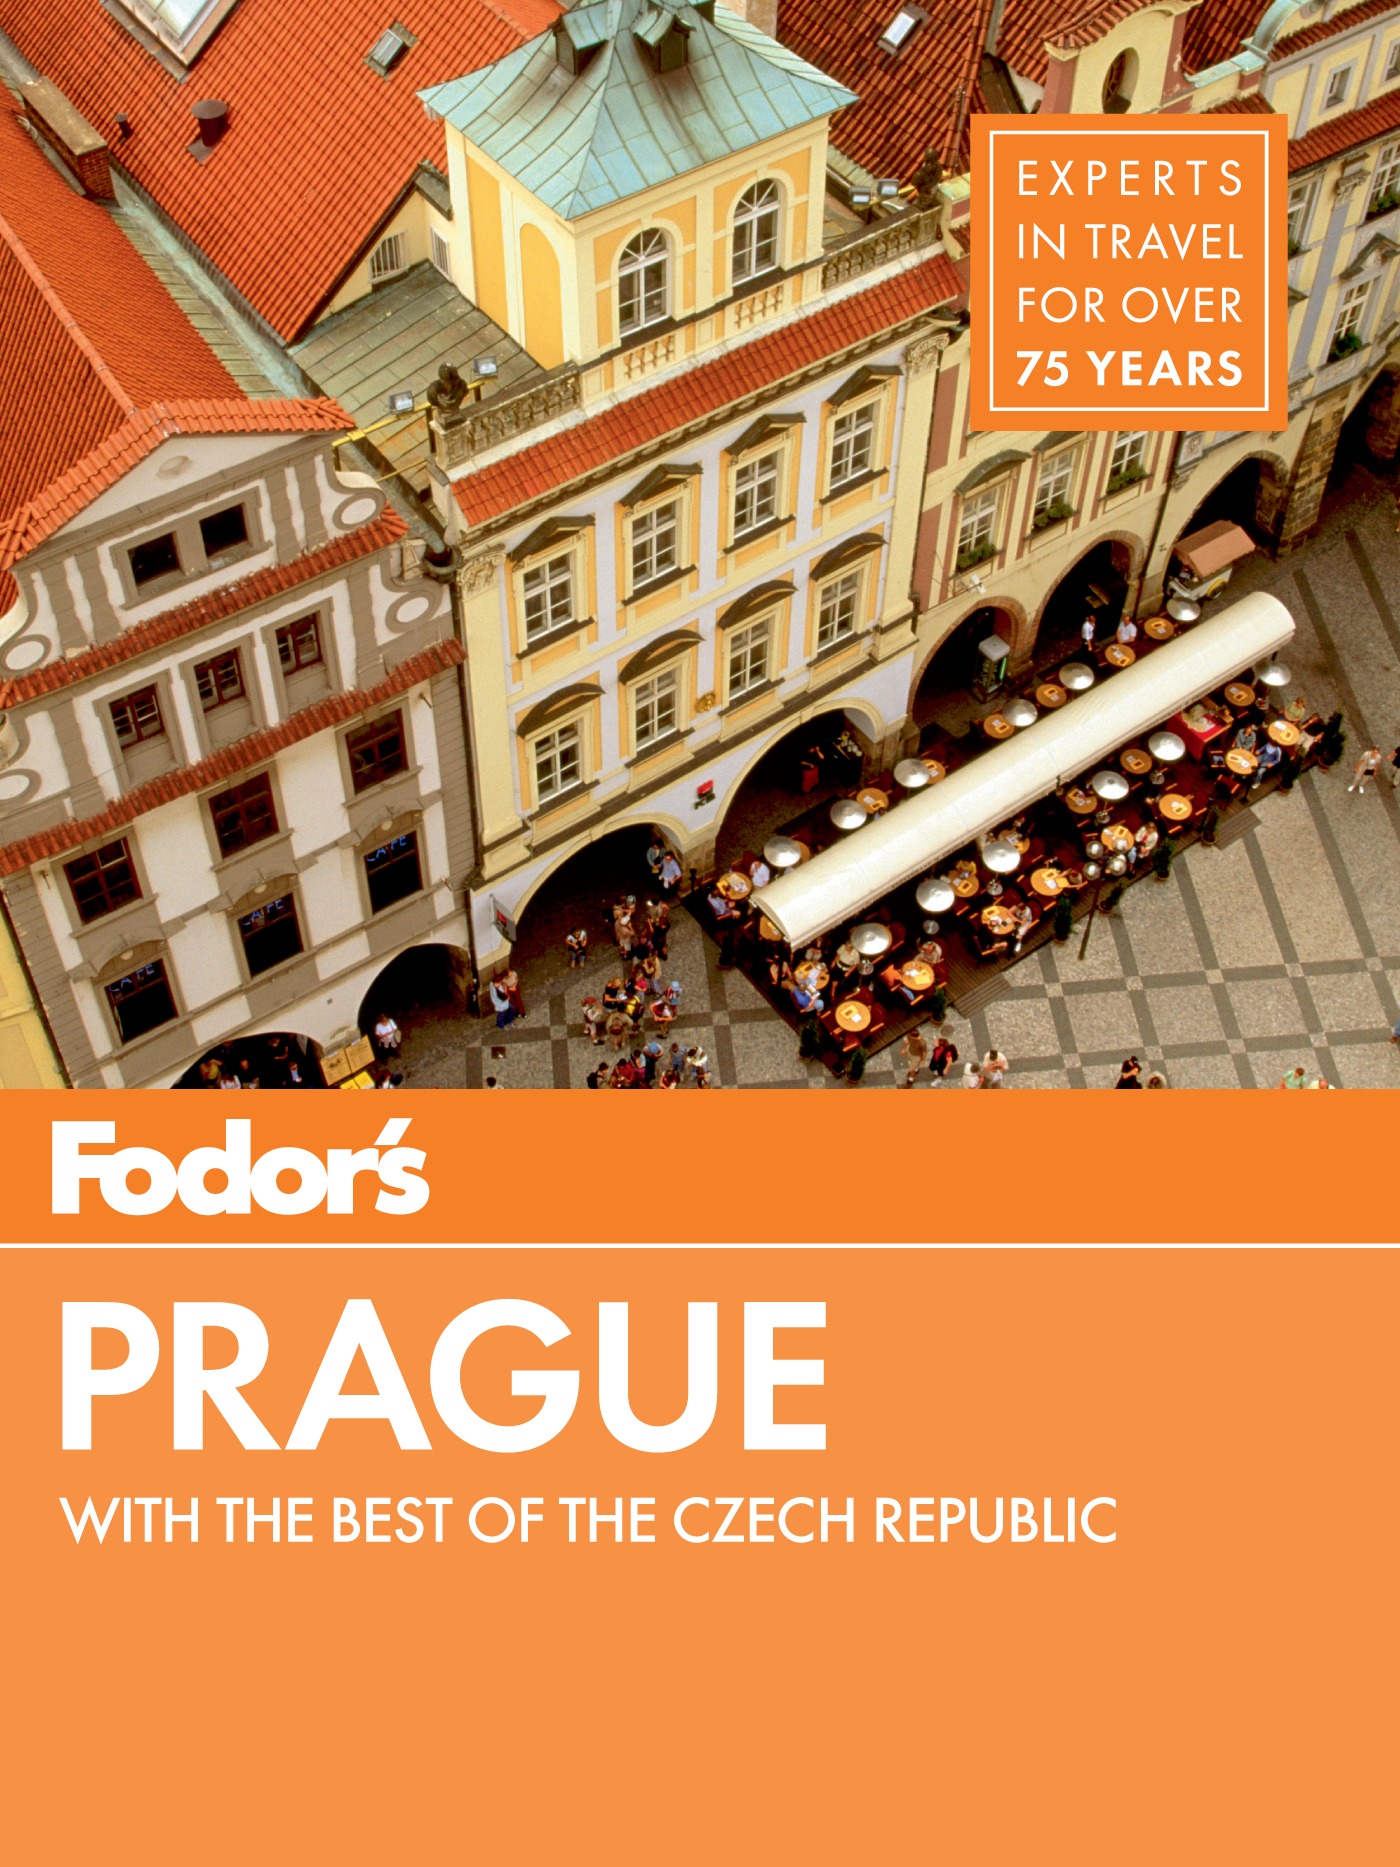 Fodor's Prague with the best of the Czech Republic cover image